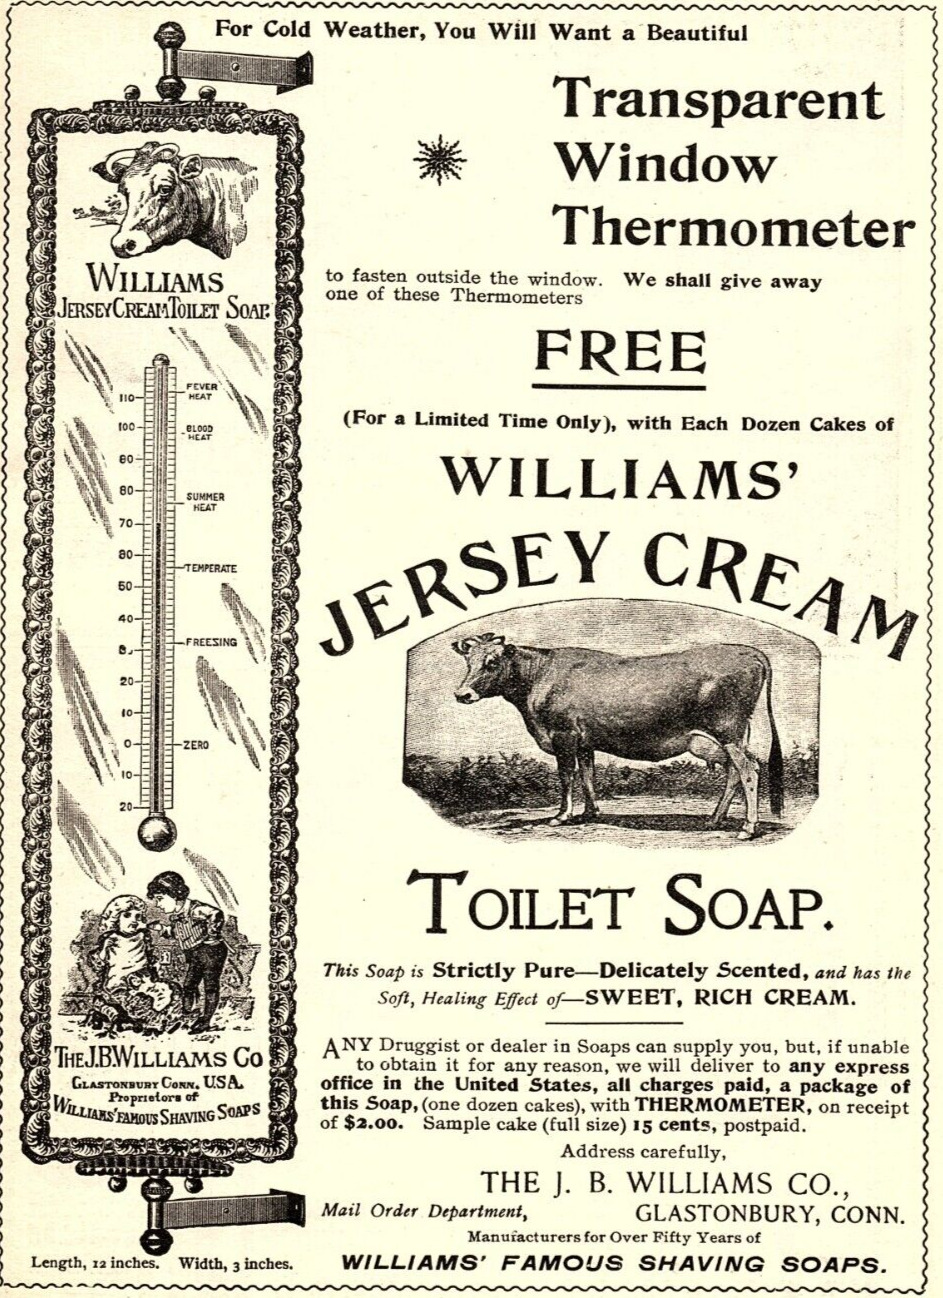 1896 WILLIAMS JERSEY CREAM TOILET SOAP COW THERMOMETER OFFER VINTAGE AD Z334